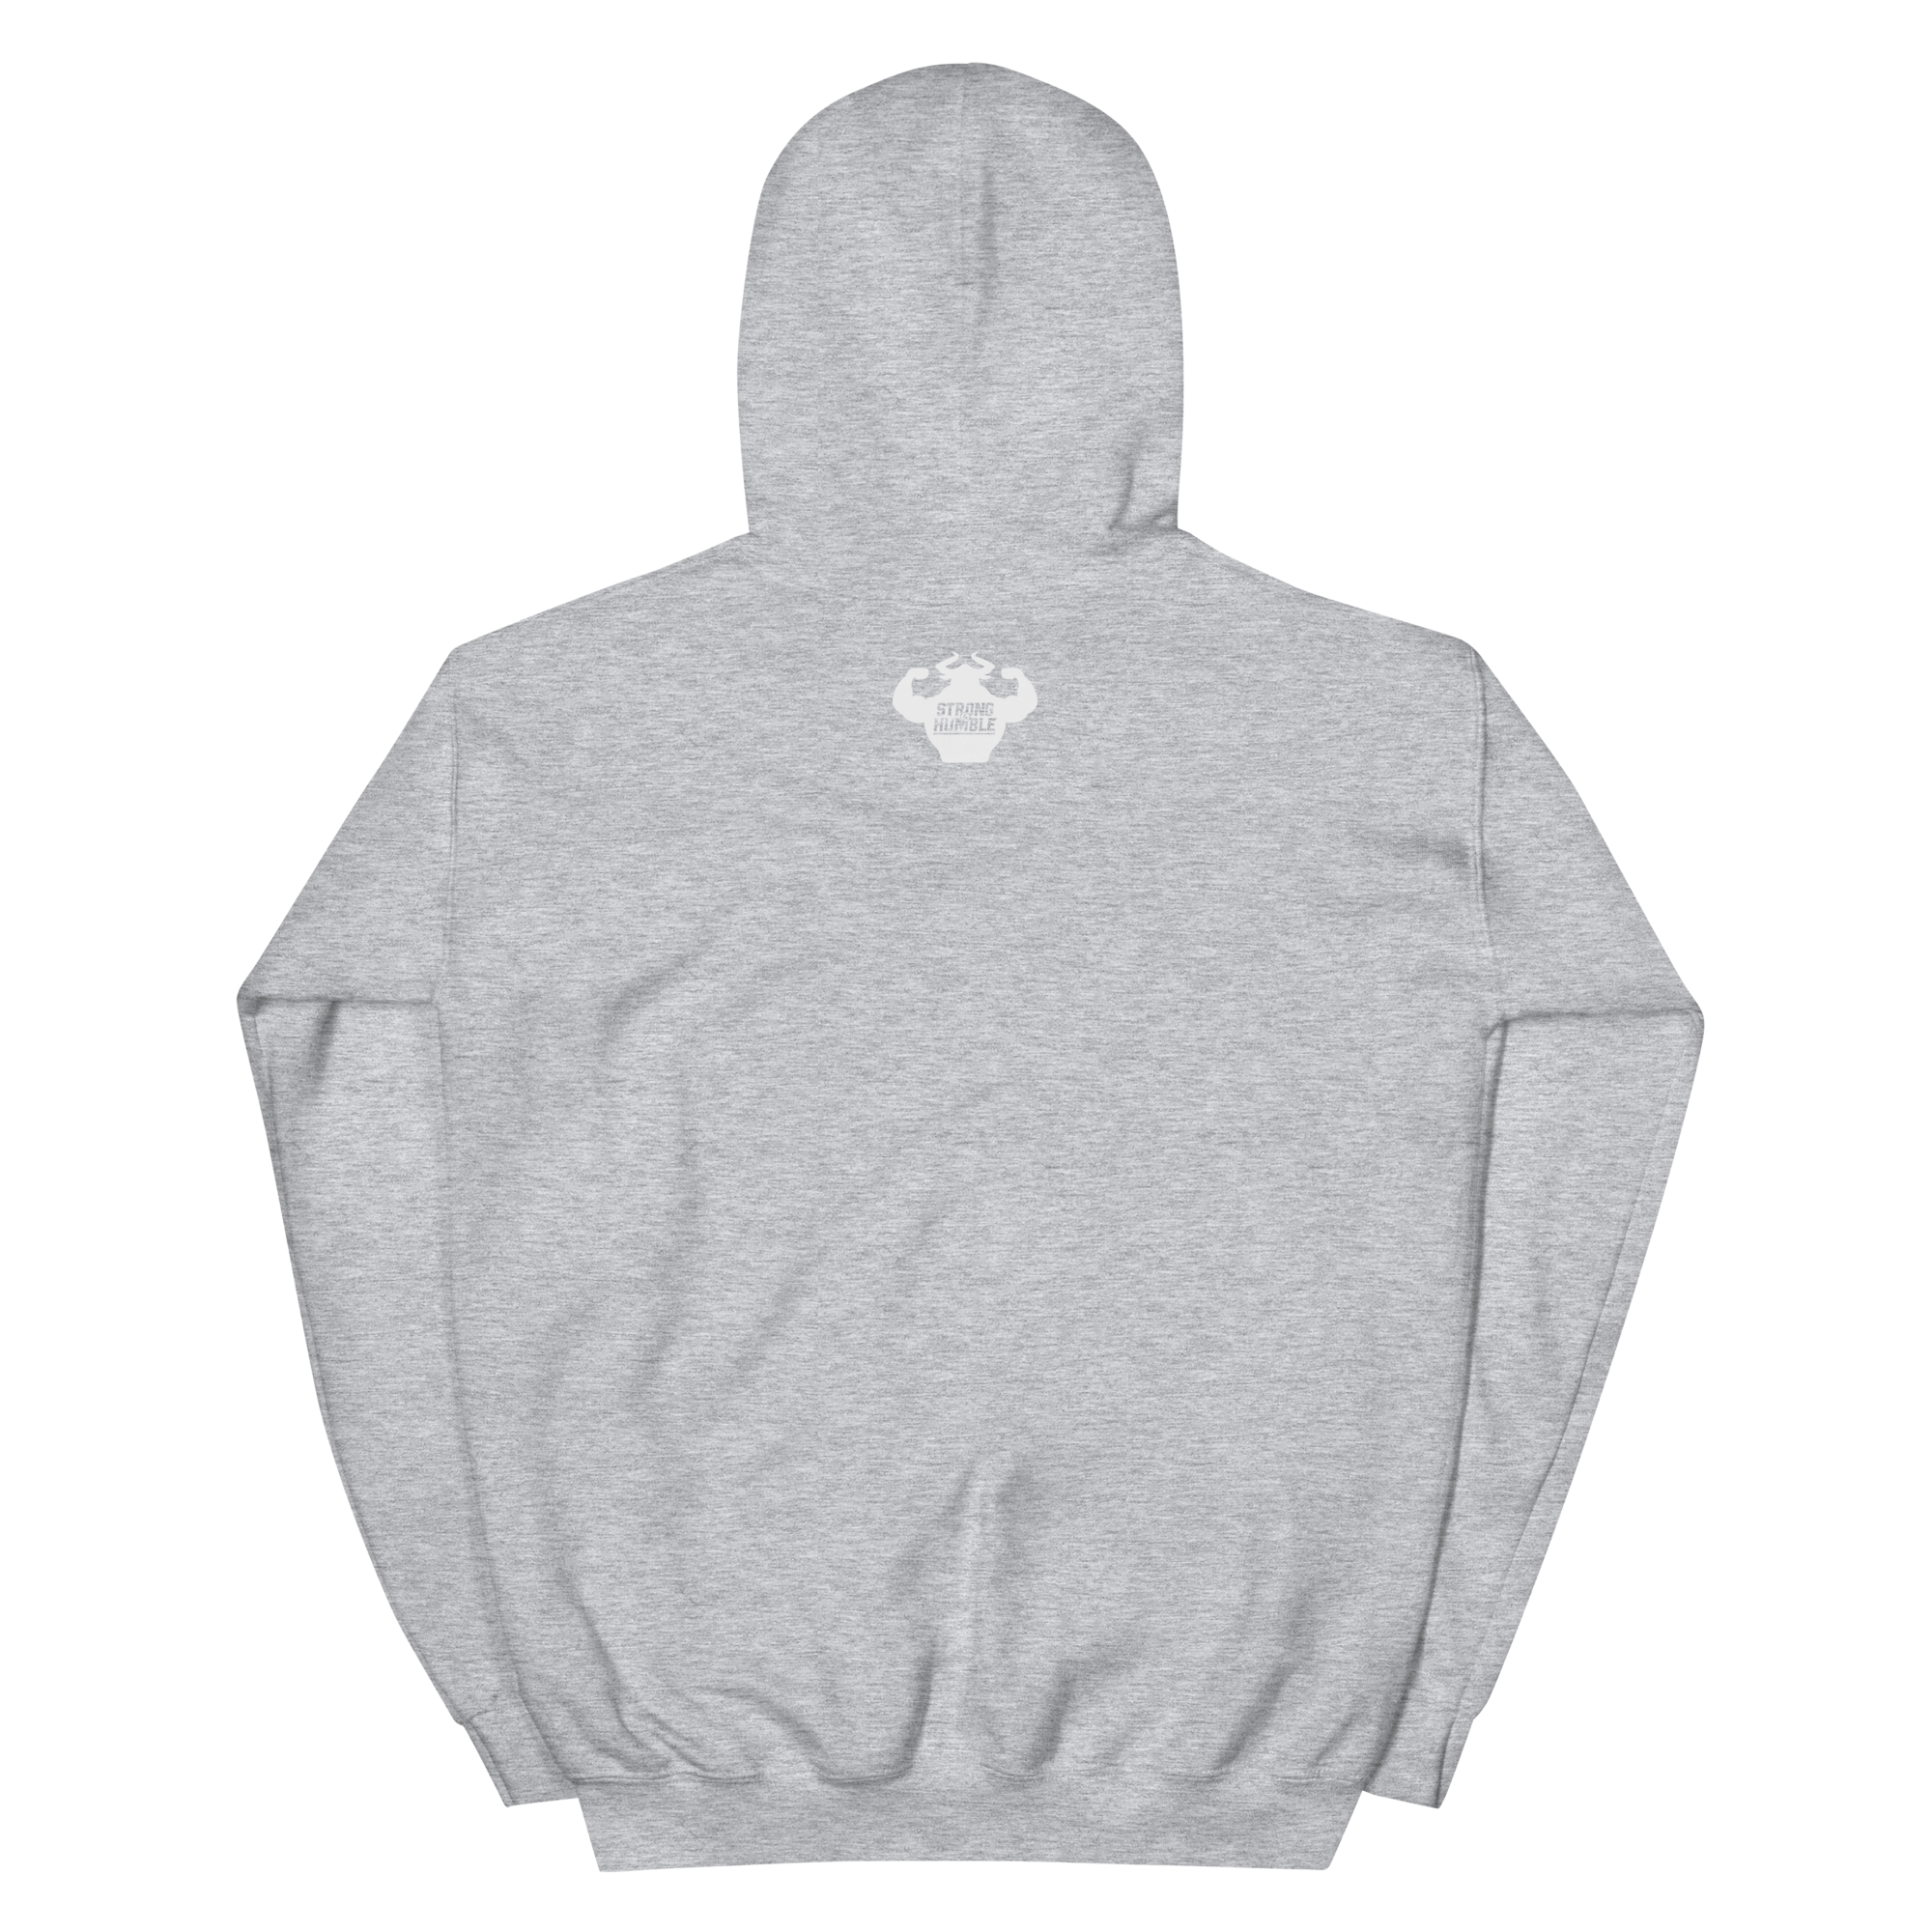 One Rep Repeat Hoodie  - Strong and Humble Apparel